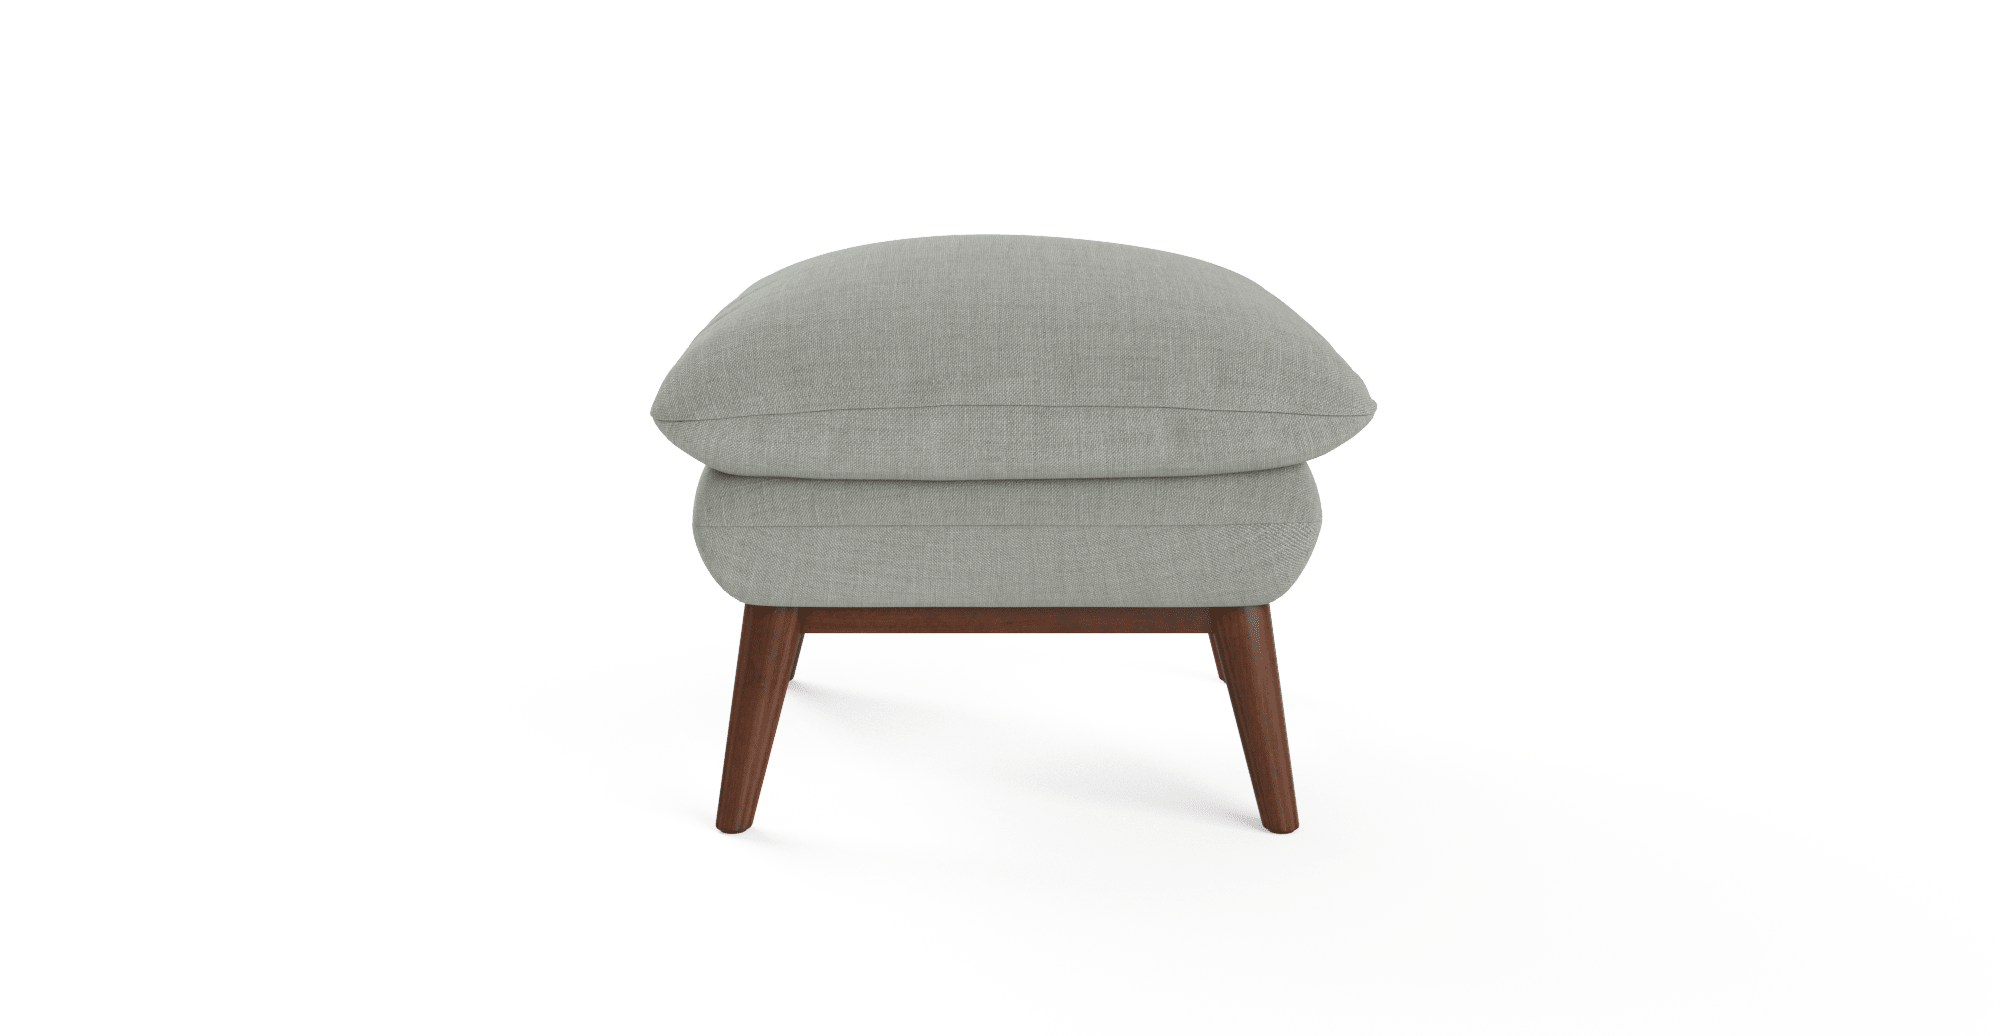 Footstool Images PNG Image High Quality PNG Image